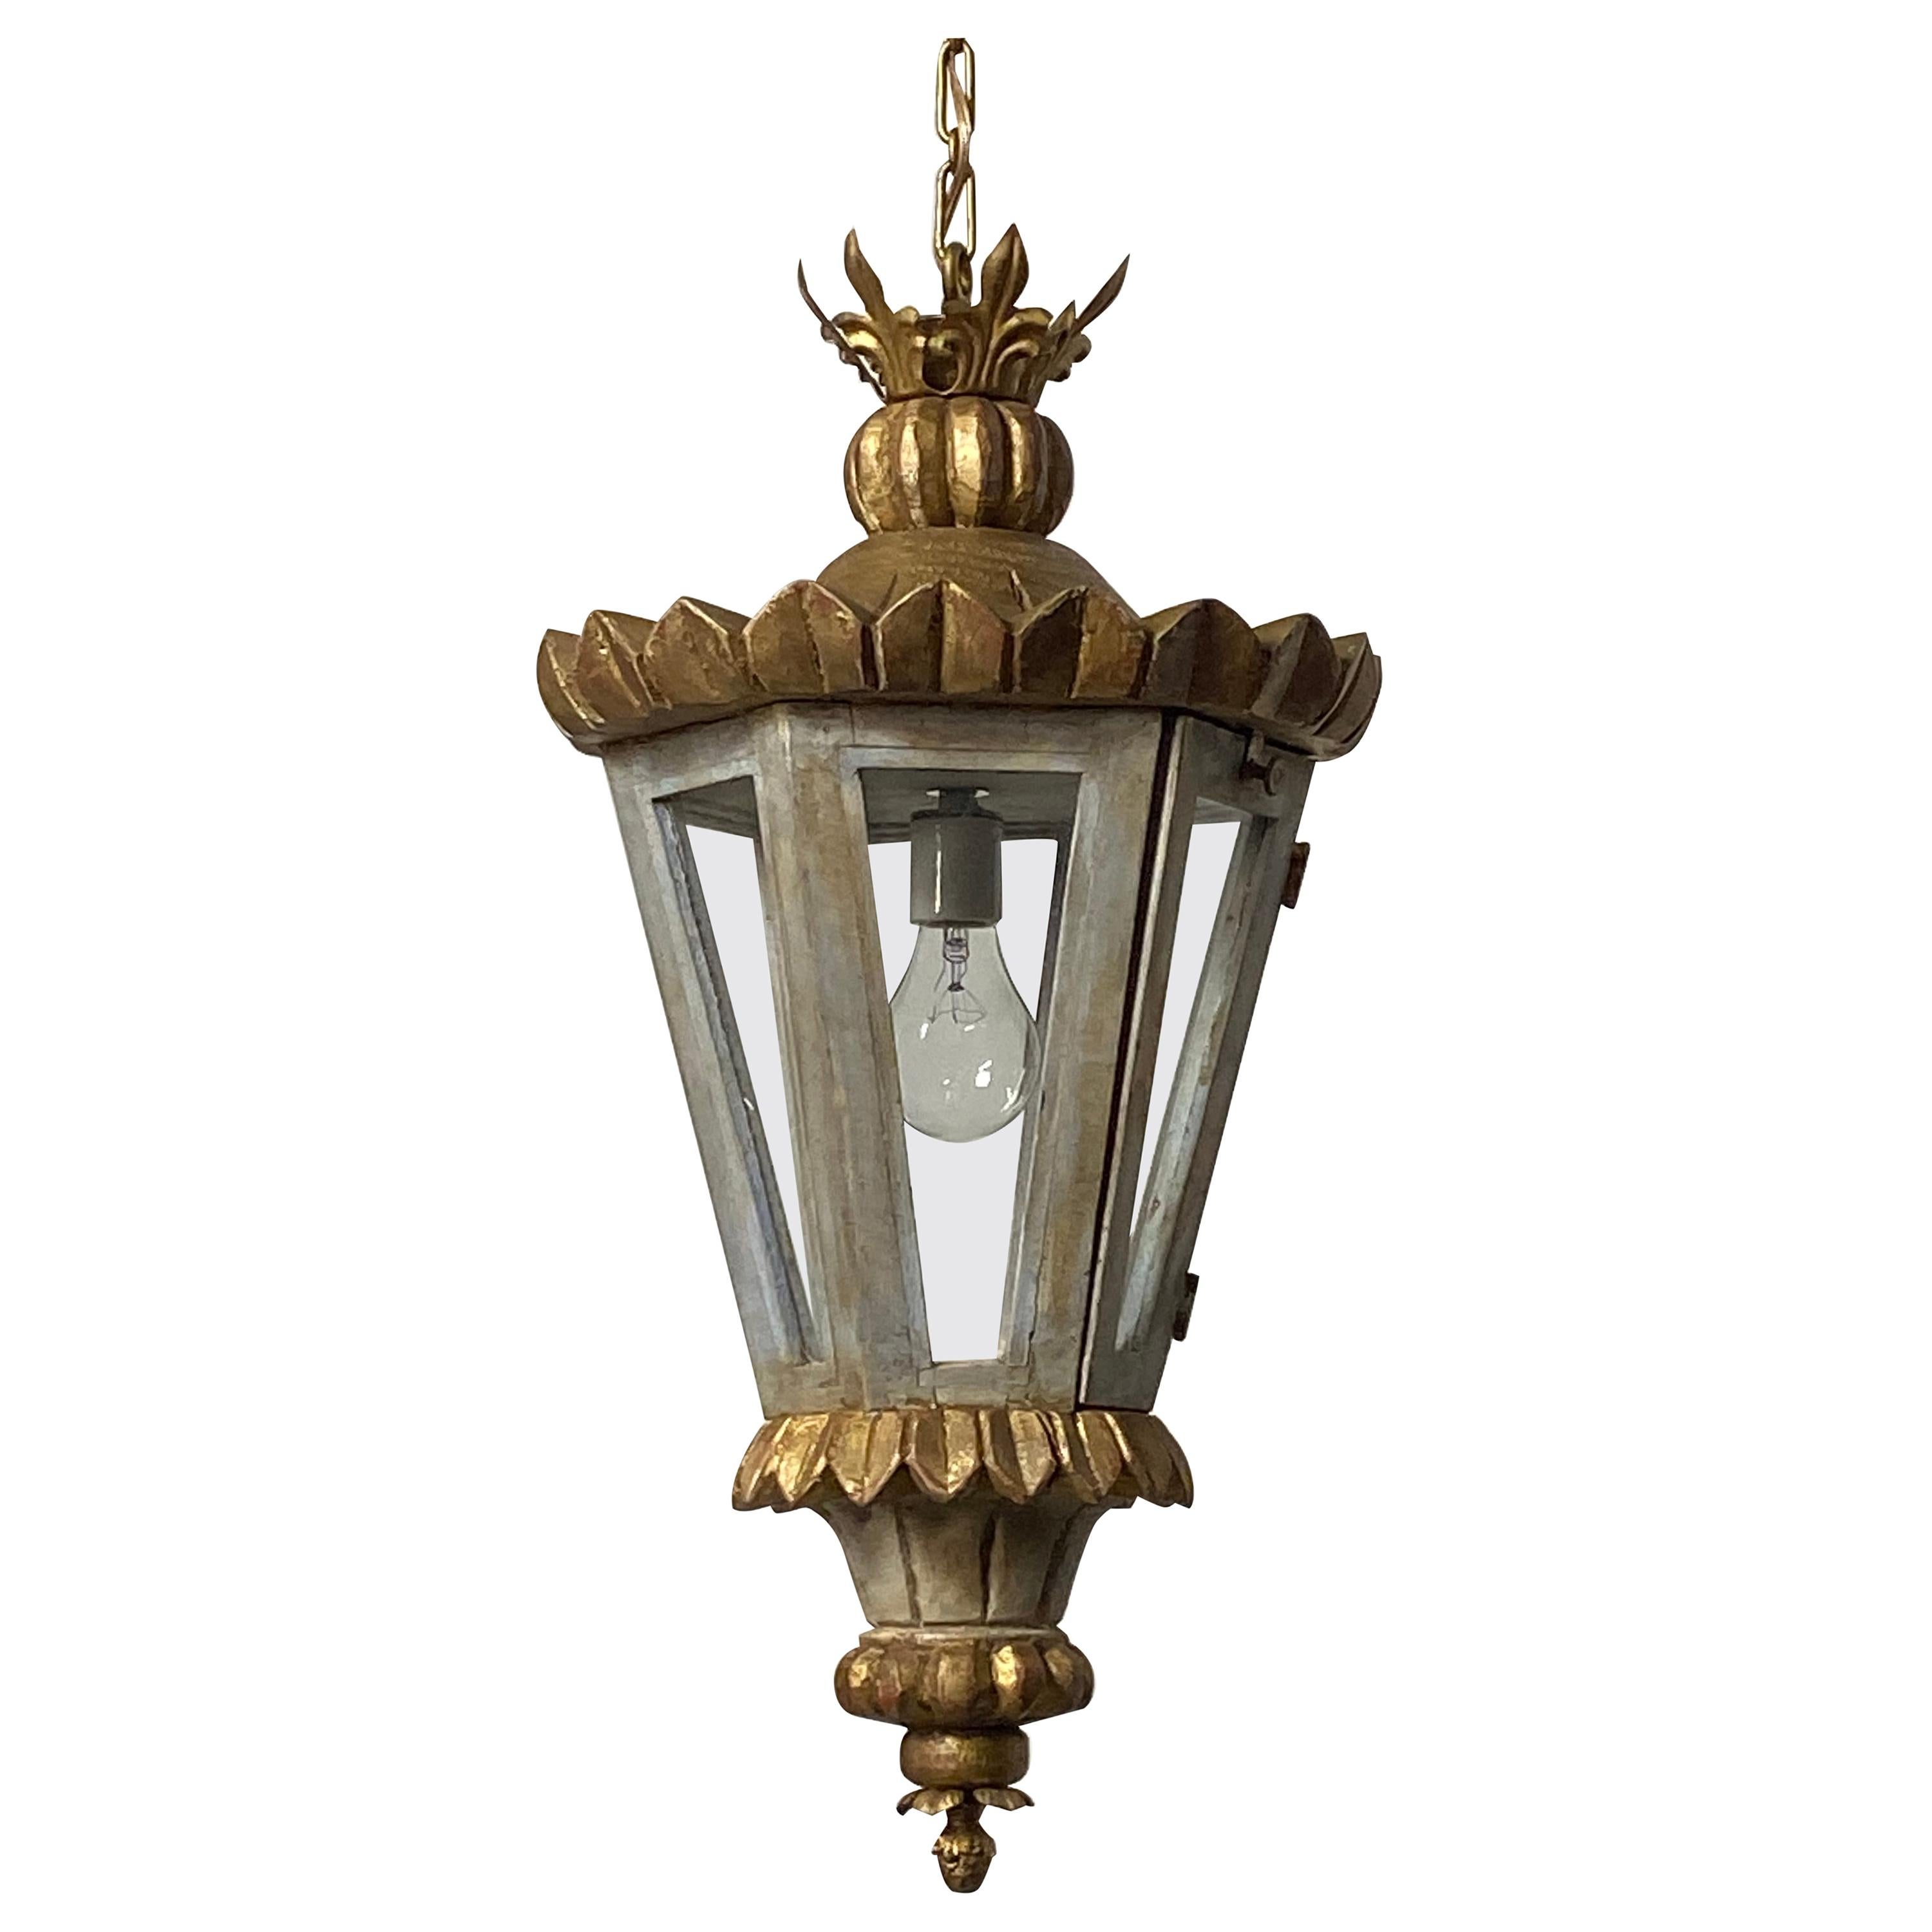 Late 19th-Early 20th Century Venetian Style Wood and Metal Hanging Lantern